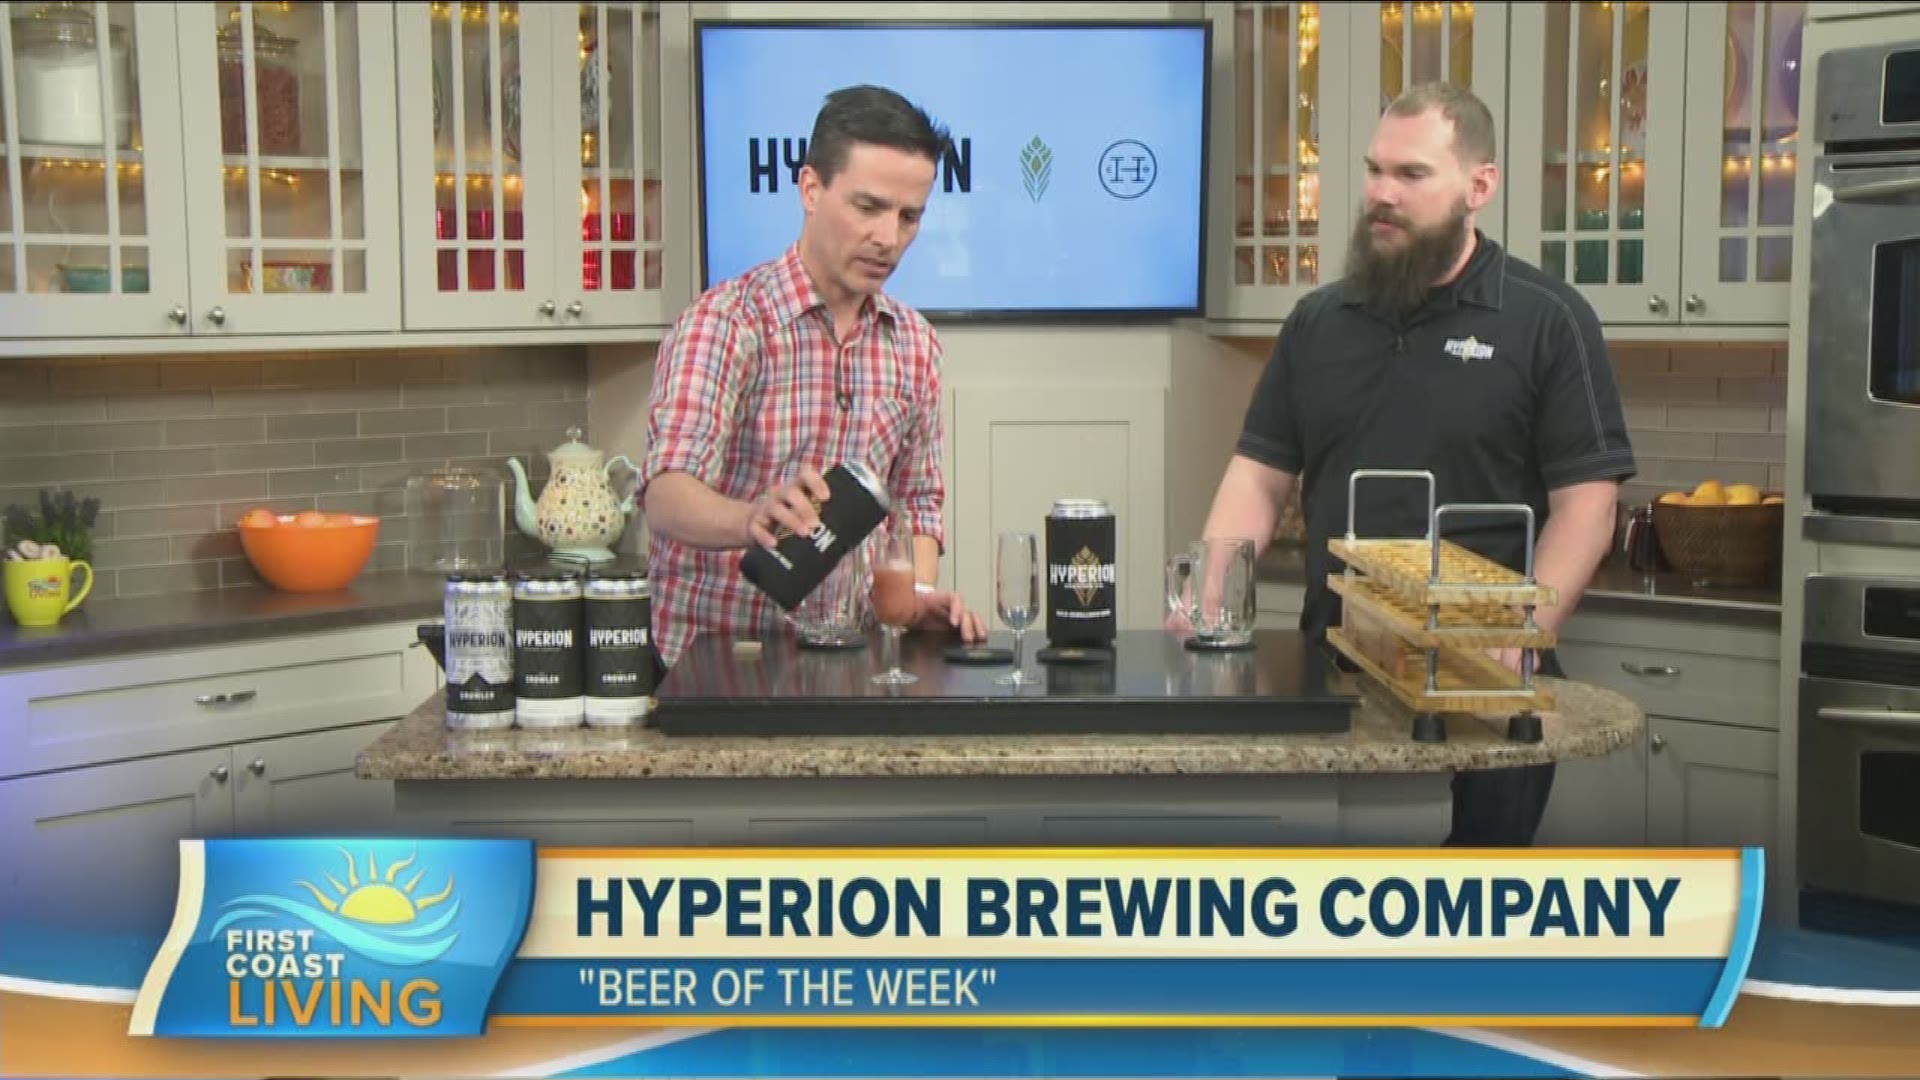 Curtis Dvorak brings us the beer of the week with Hyperion Brewing Company with a peanut butter flavored beer and blood orange beer.